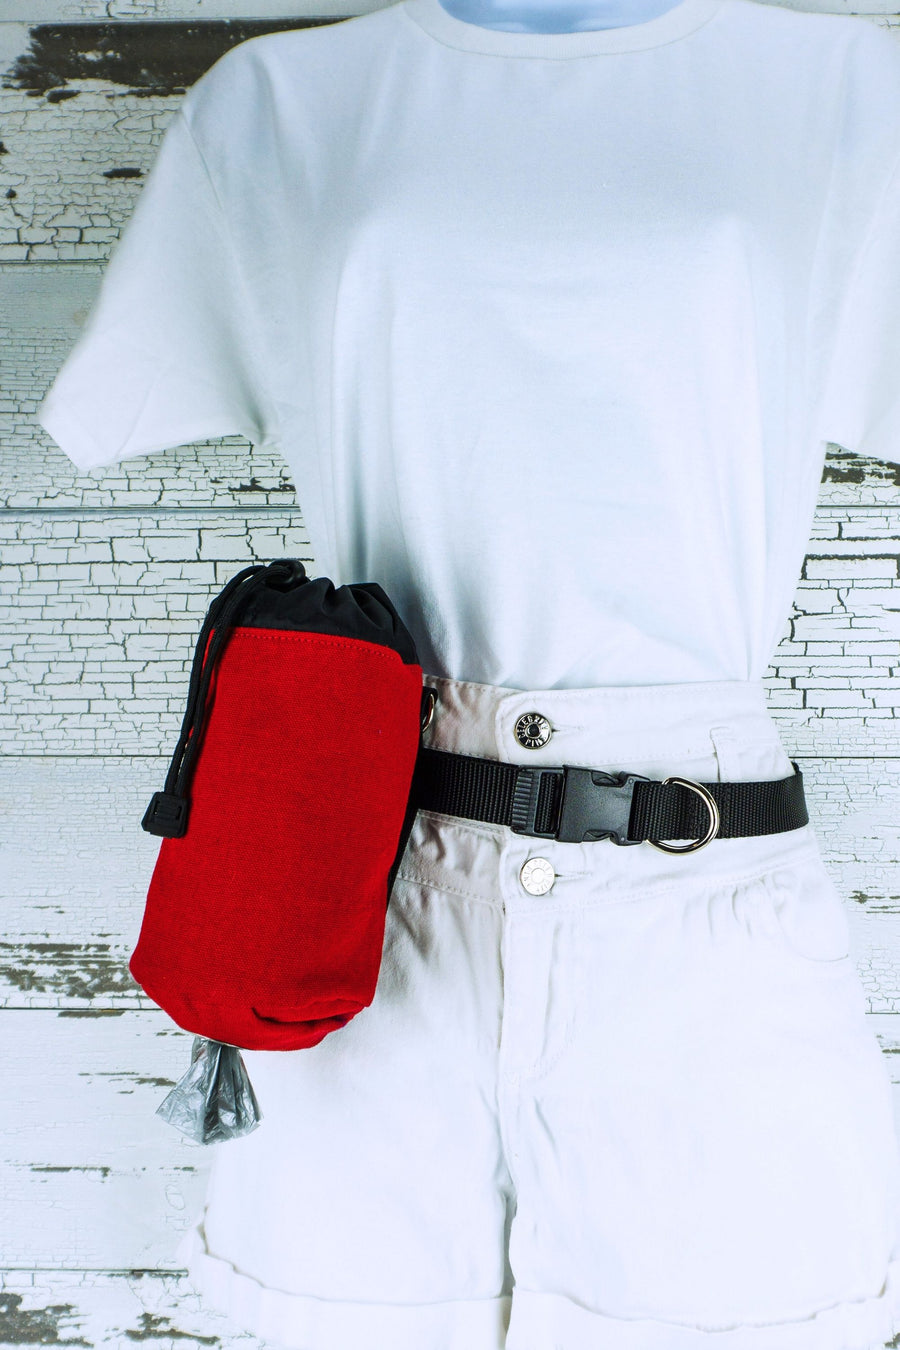 Dog walking pouch with waste bag dispenser shown in red with black lining on a light weight hands free leash belt.